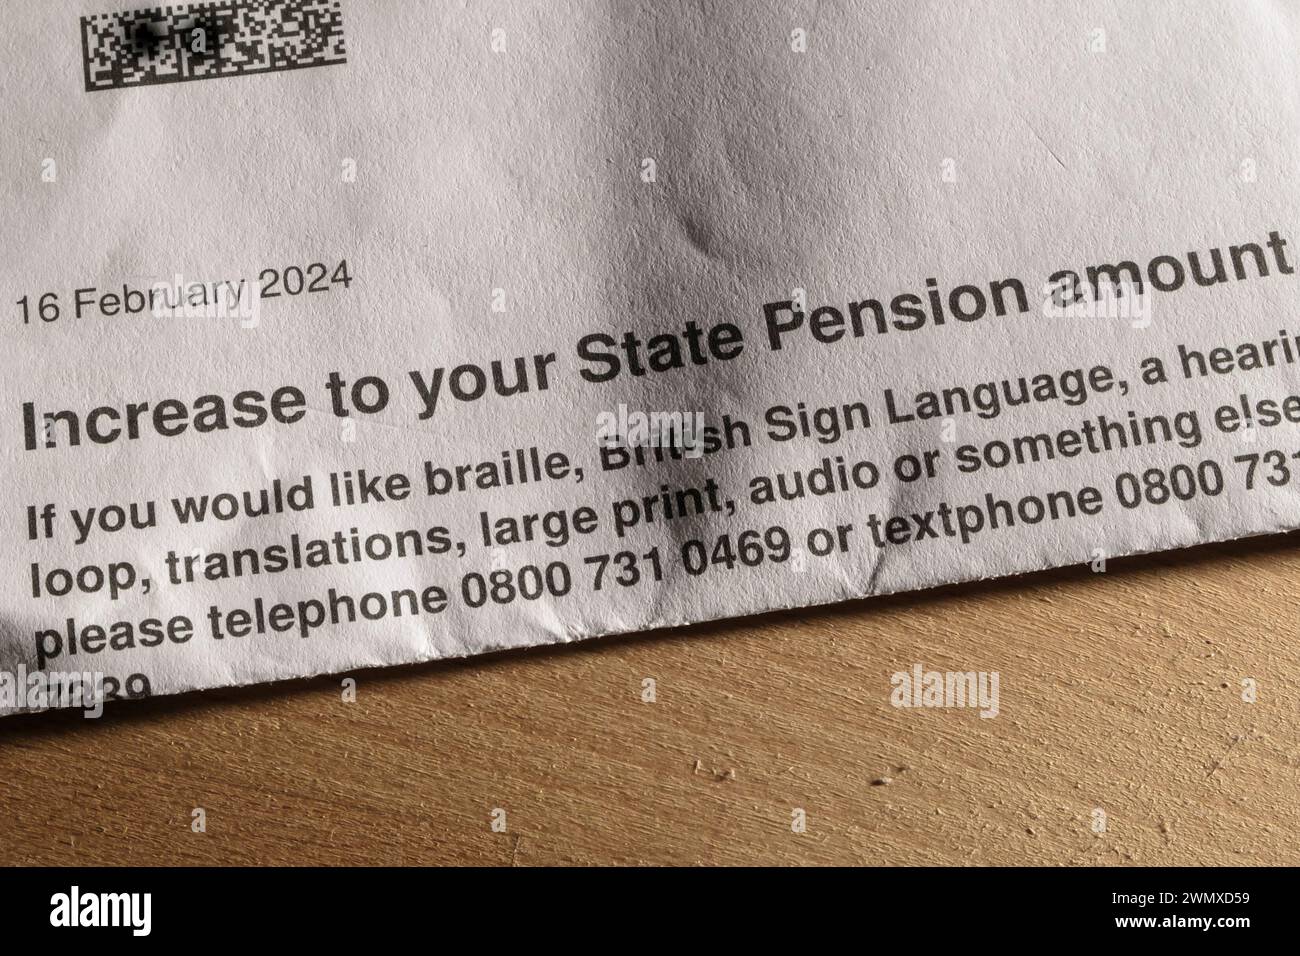 State Pension Increase Letter 2024 Stock Photo